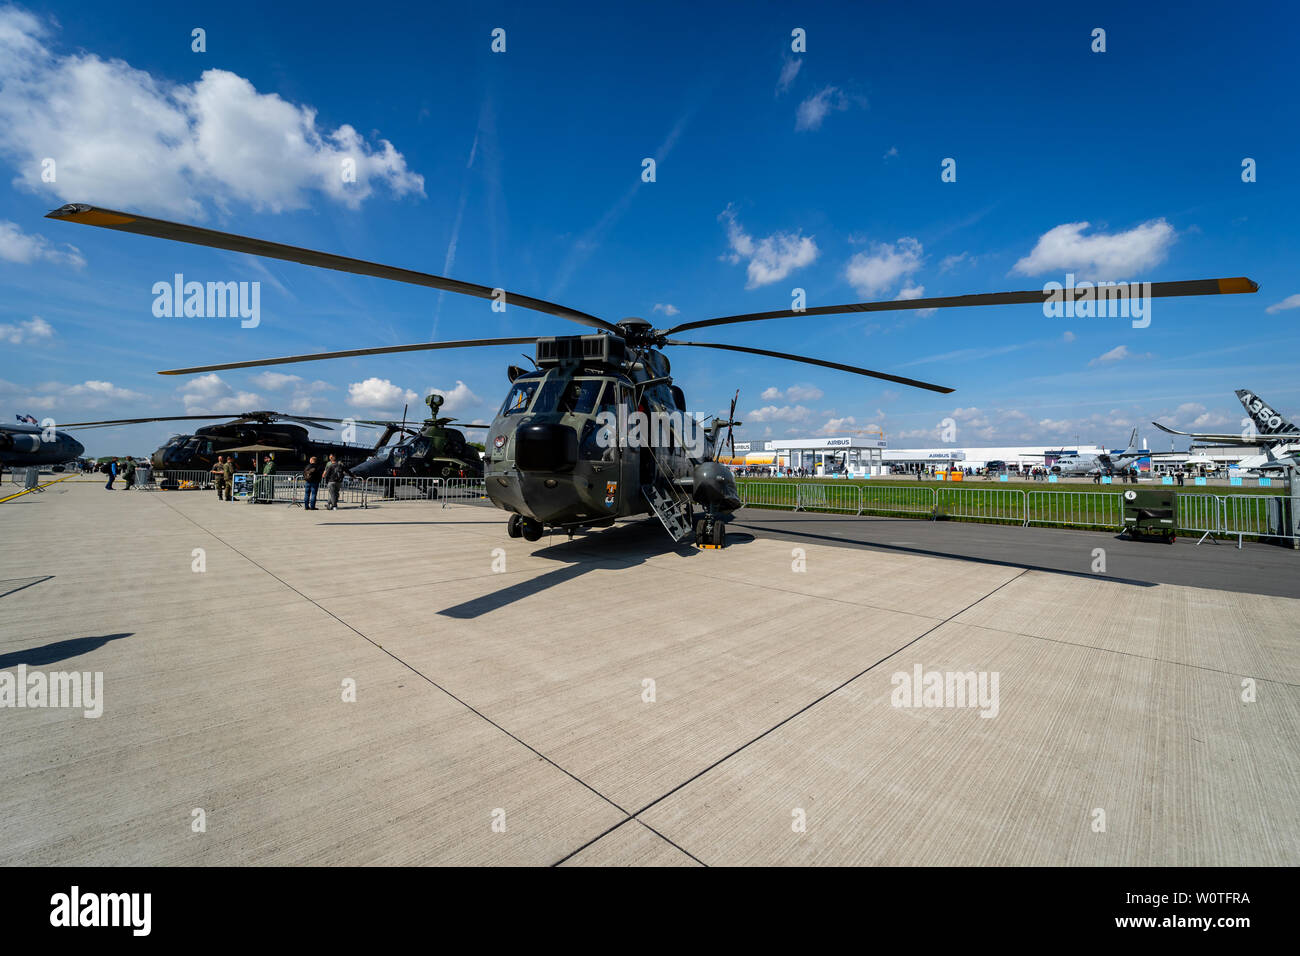 BERLIN, GERMANY - APRIL 27, 2018: Anti-submarine warfare, search and rescue and utility helicopter Sikorsky SH-3 Sea King. German Navy. Exhibition ILA Berlin Air Show 2018. Stock Photo